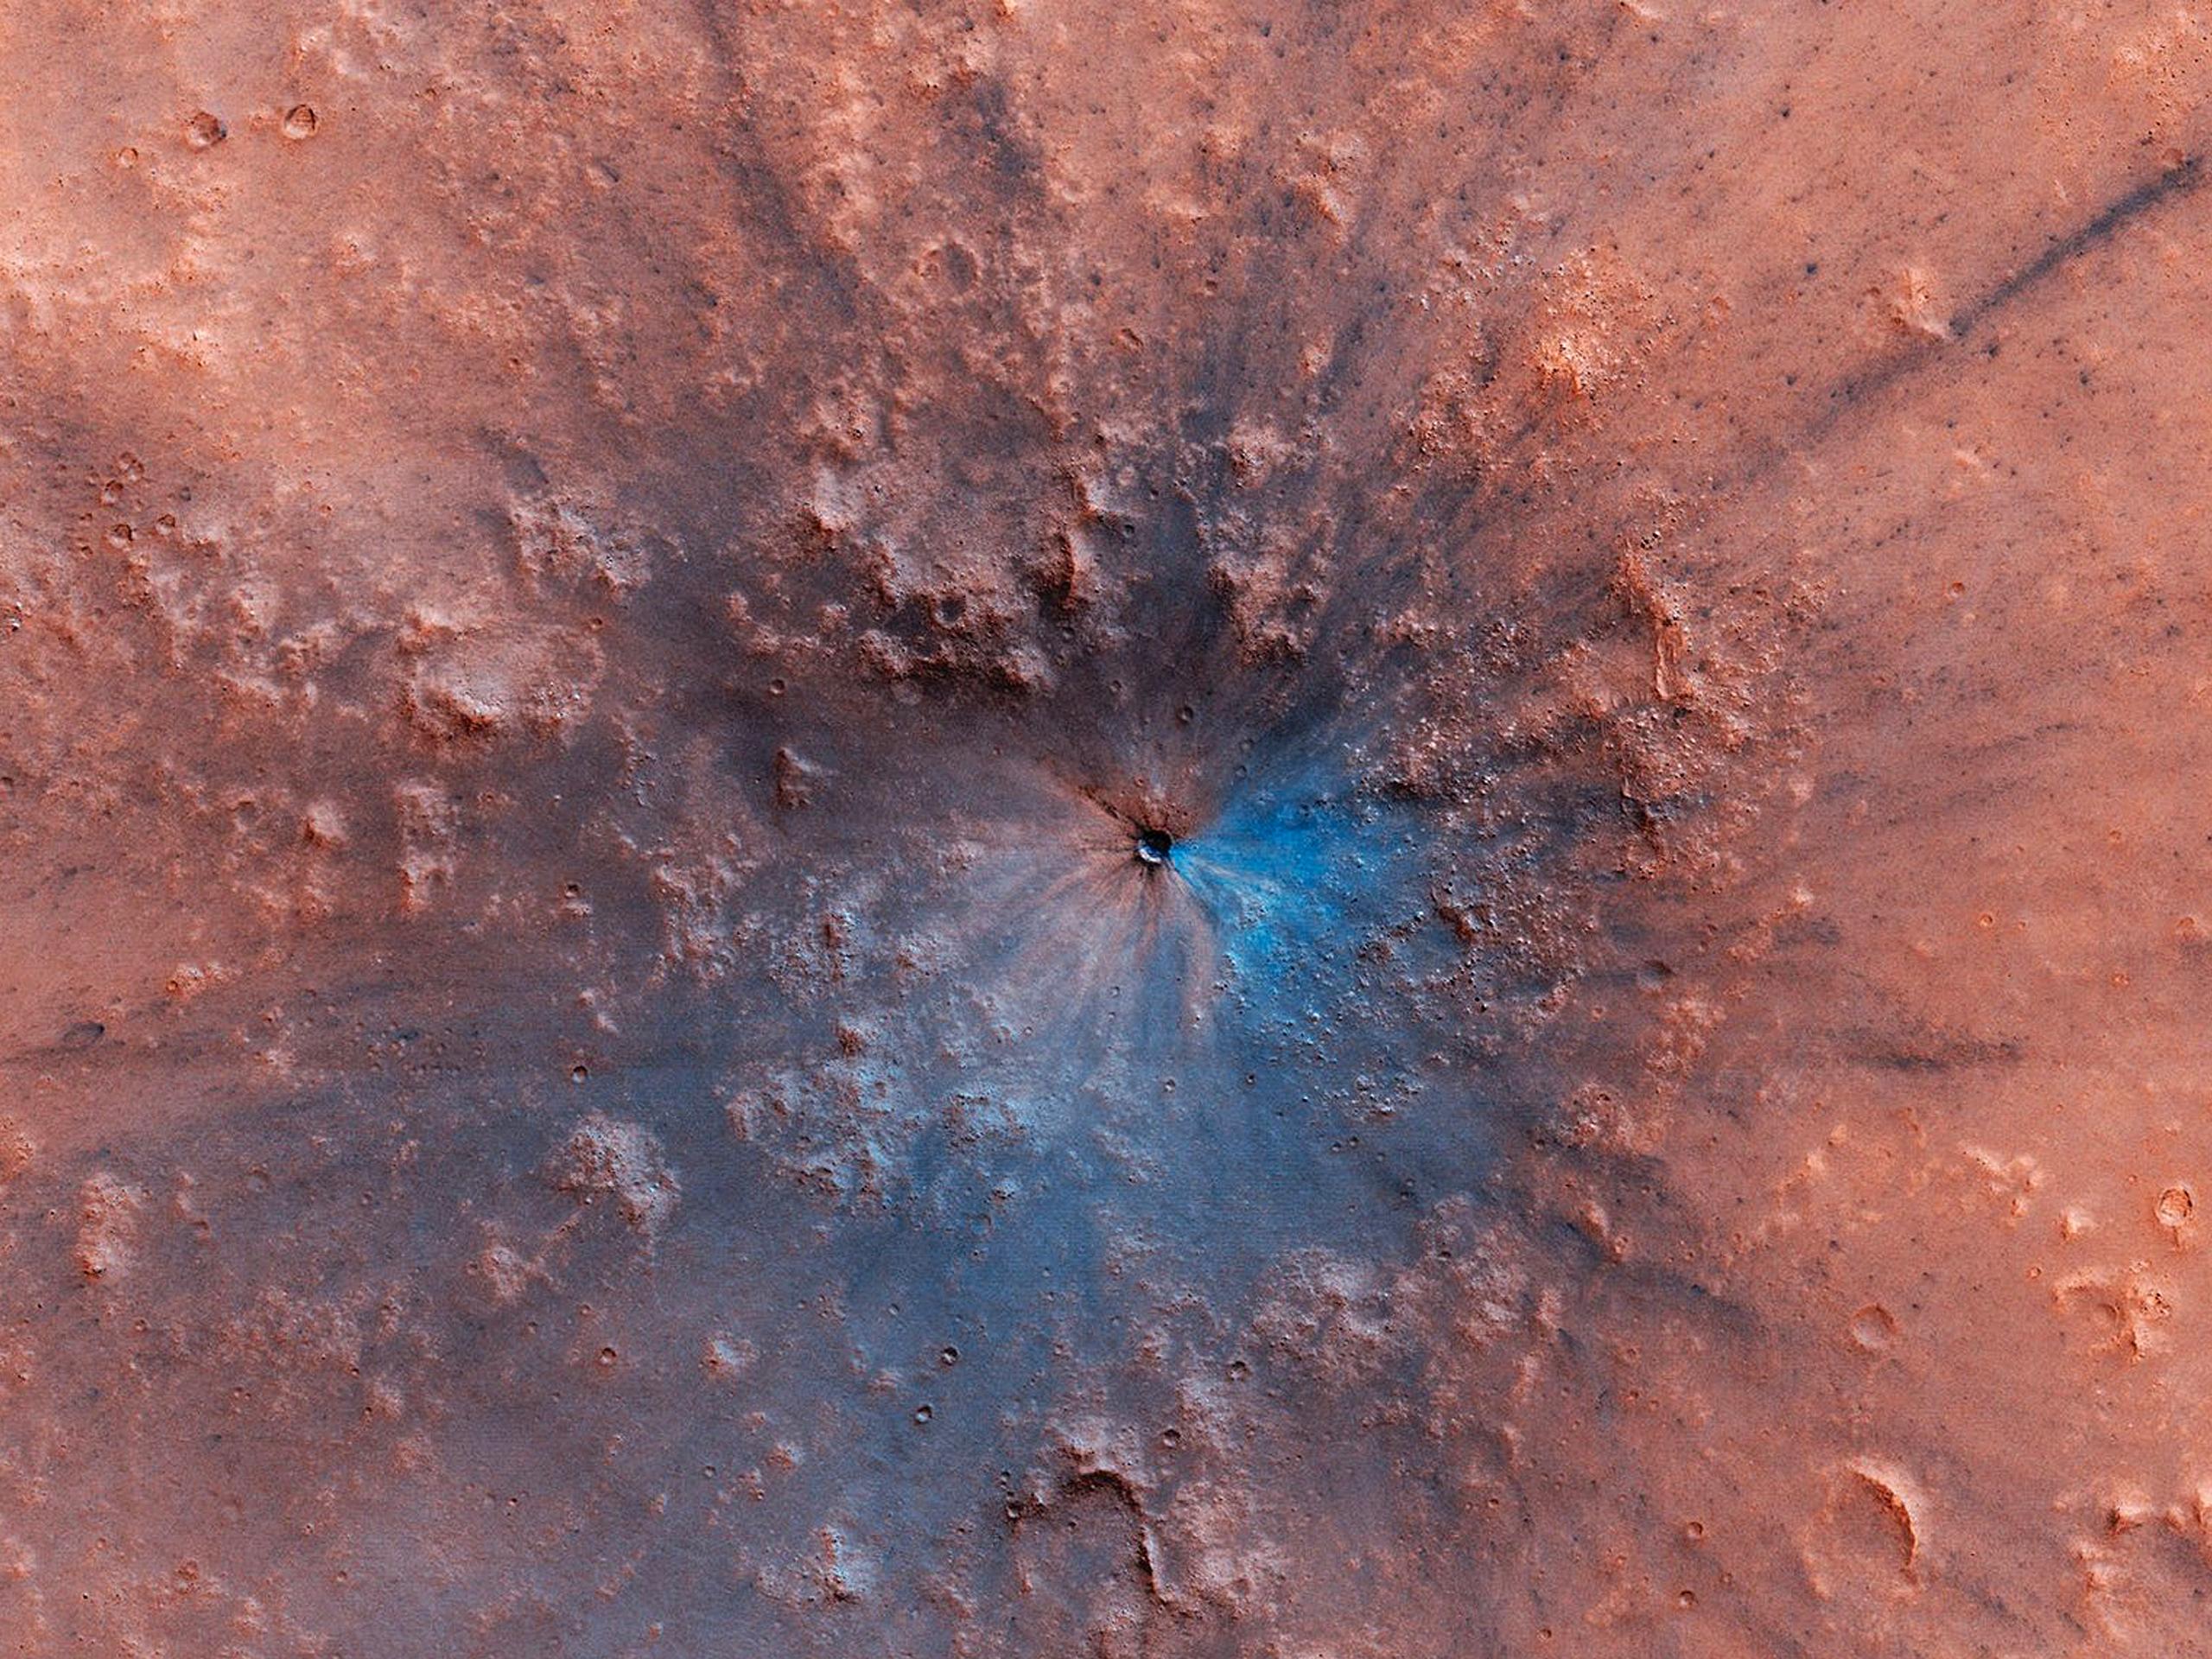 This image, acquired by NASAs Mars Reconnaissance Orbiter, shows a new impact crater that has appeared on the surface of Mars, formed at most between September 2016 and February 2019.